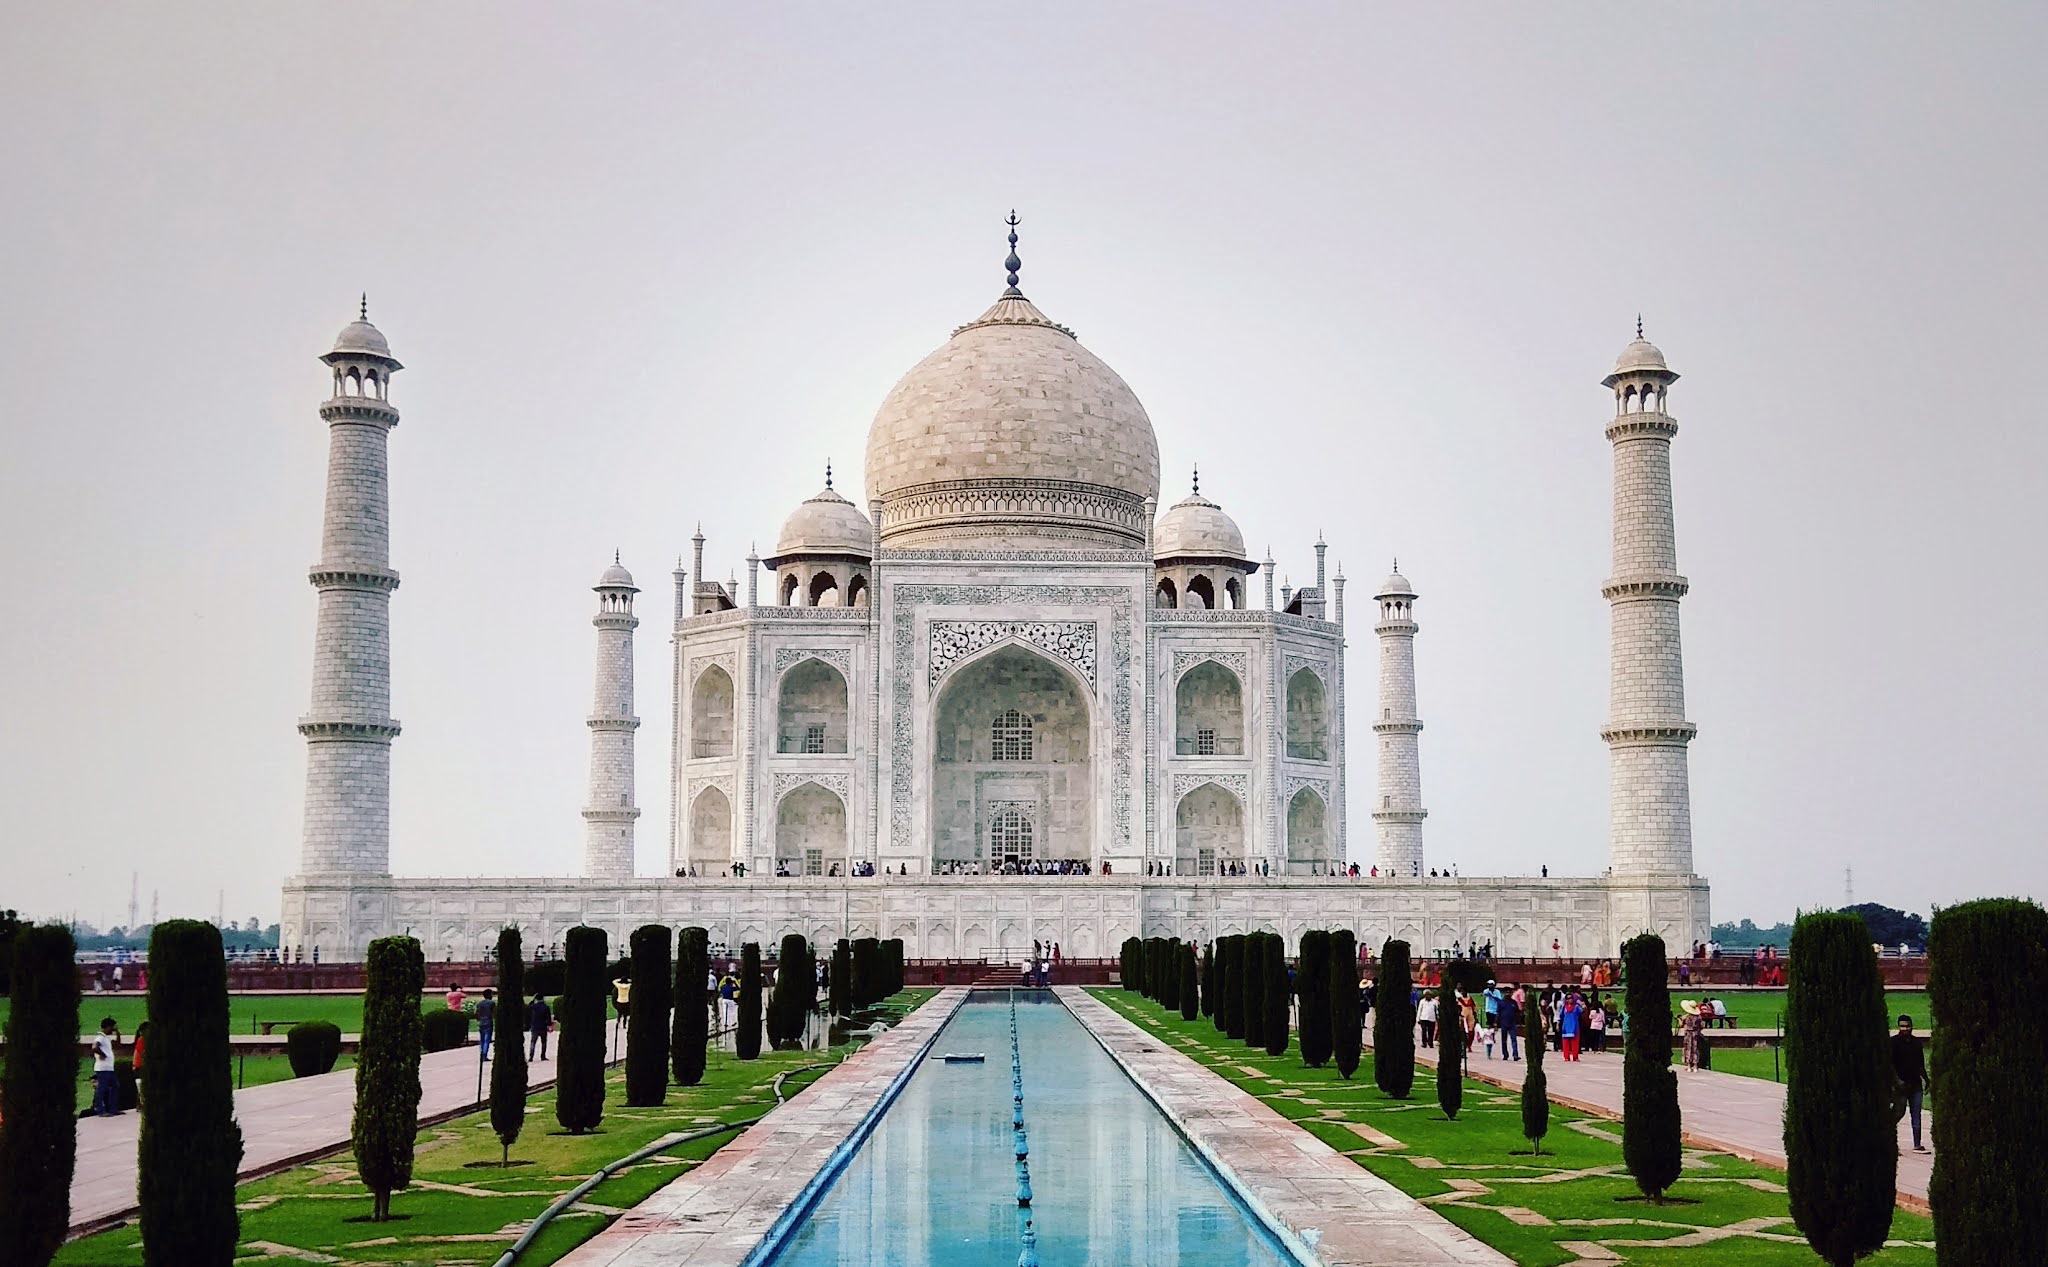 Taj Mahal, one of the best places to visit in India